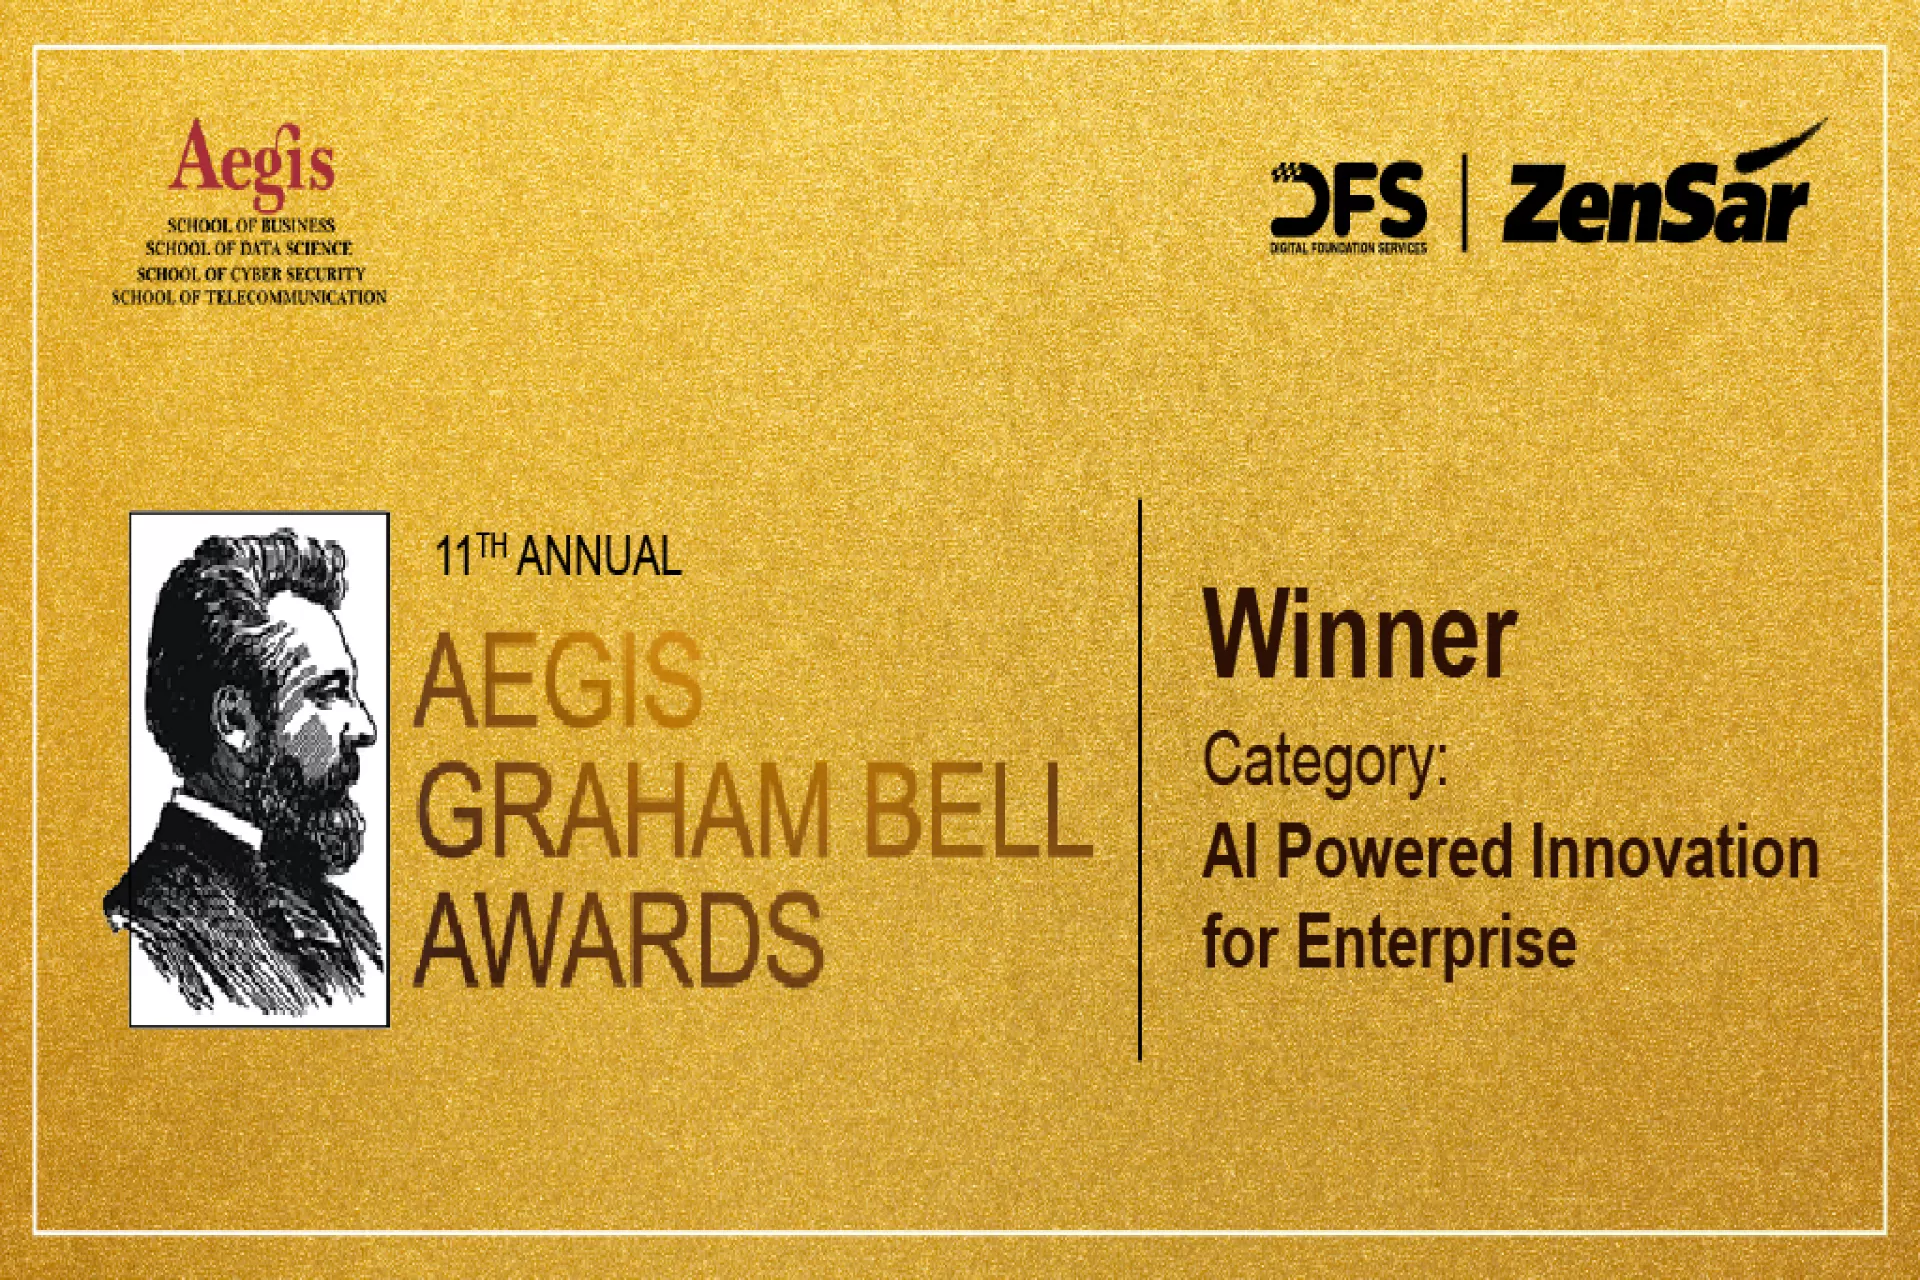 Zensar wins at the 11th Annual Aegis Graham Bell Awards 